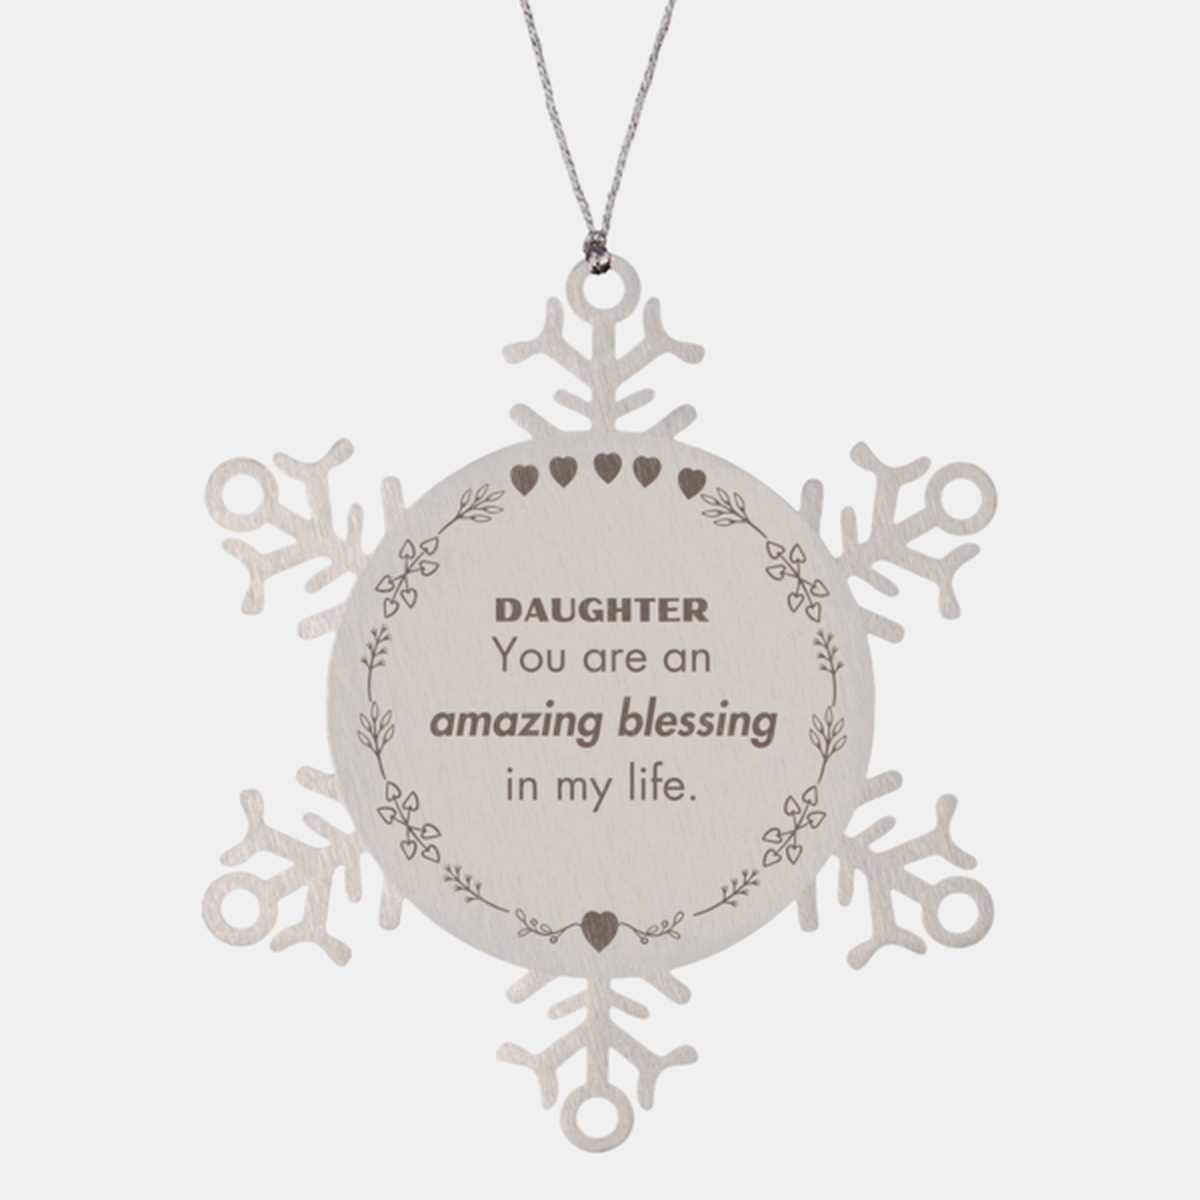 Daughter Snowflake Ornament, You are an amazing blessing in my life, Thank You Gifts For Daughter, Inspirational Birthday Christmas Unique Gifts For Daughter